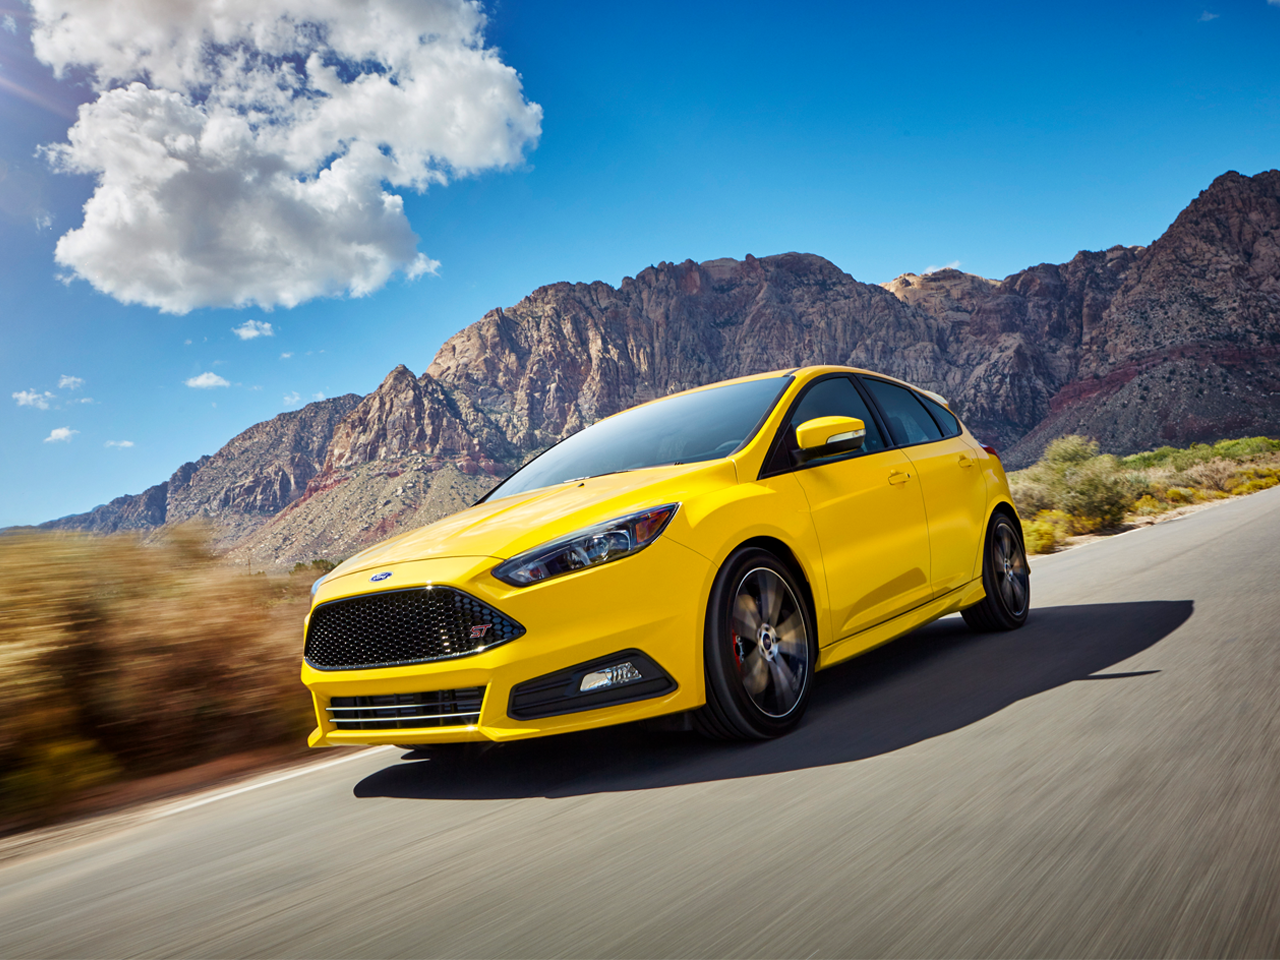 https://truecarblog.imgix.net/wp-content/uploads/2020/04/CG_3248-Used-Buying-Guide-Ford-Focus-ST-Header-Image-1.png